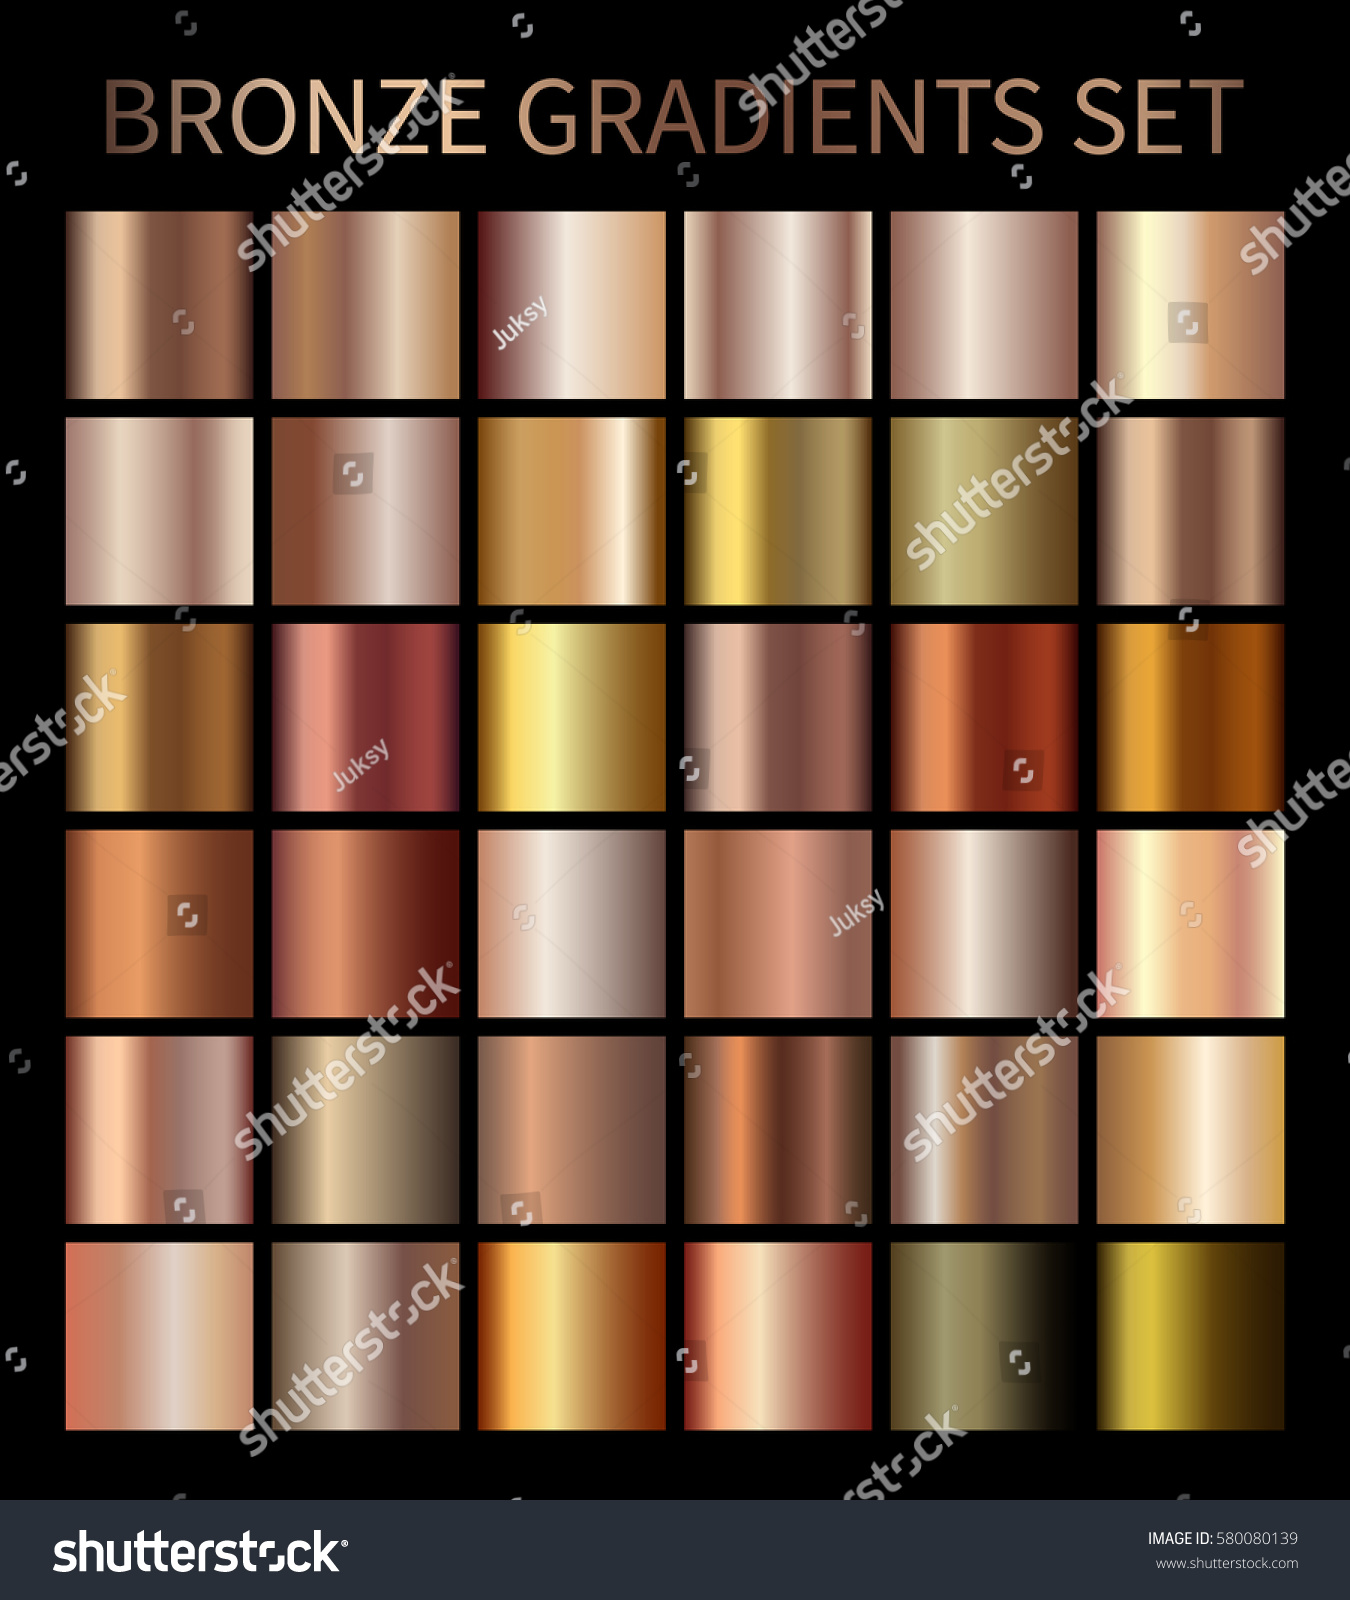 Bronze gold gradients. Collection of beige gradient illustrations for backgrounds, cover, frame, ribbon, banner, coin, label, flyer, card, poster etc. Vector template EPS10 #580080139